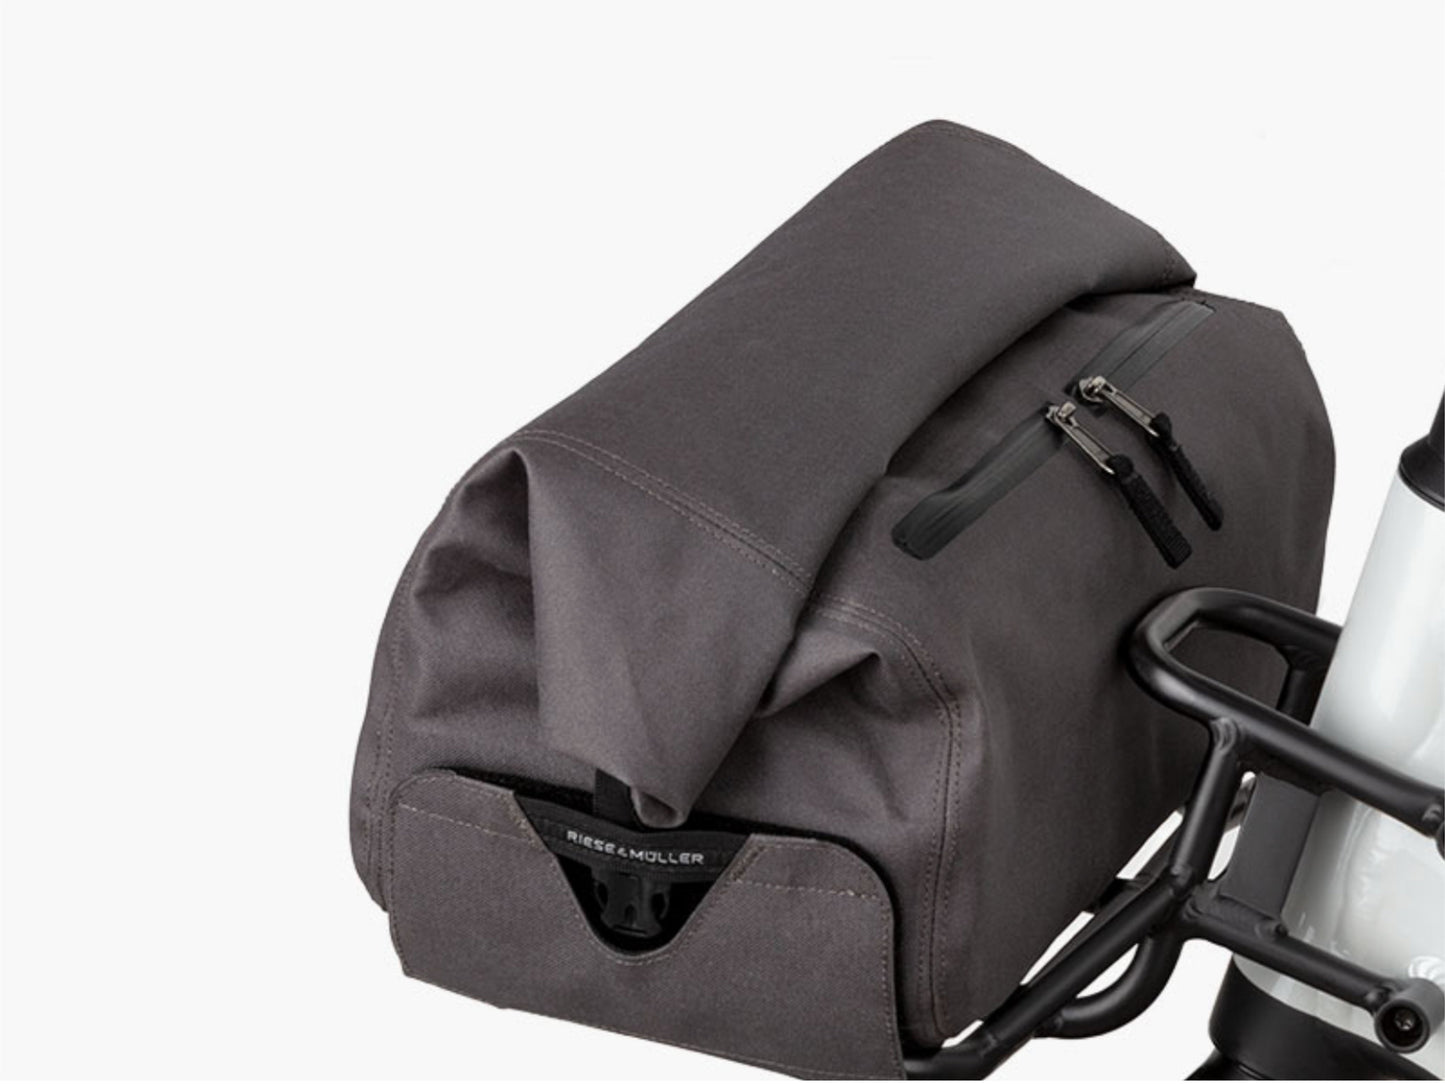 Riese and Muller Multicharger Mixte GT Touring HS emtb hardtail close up front carrier bag option